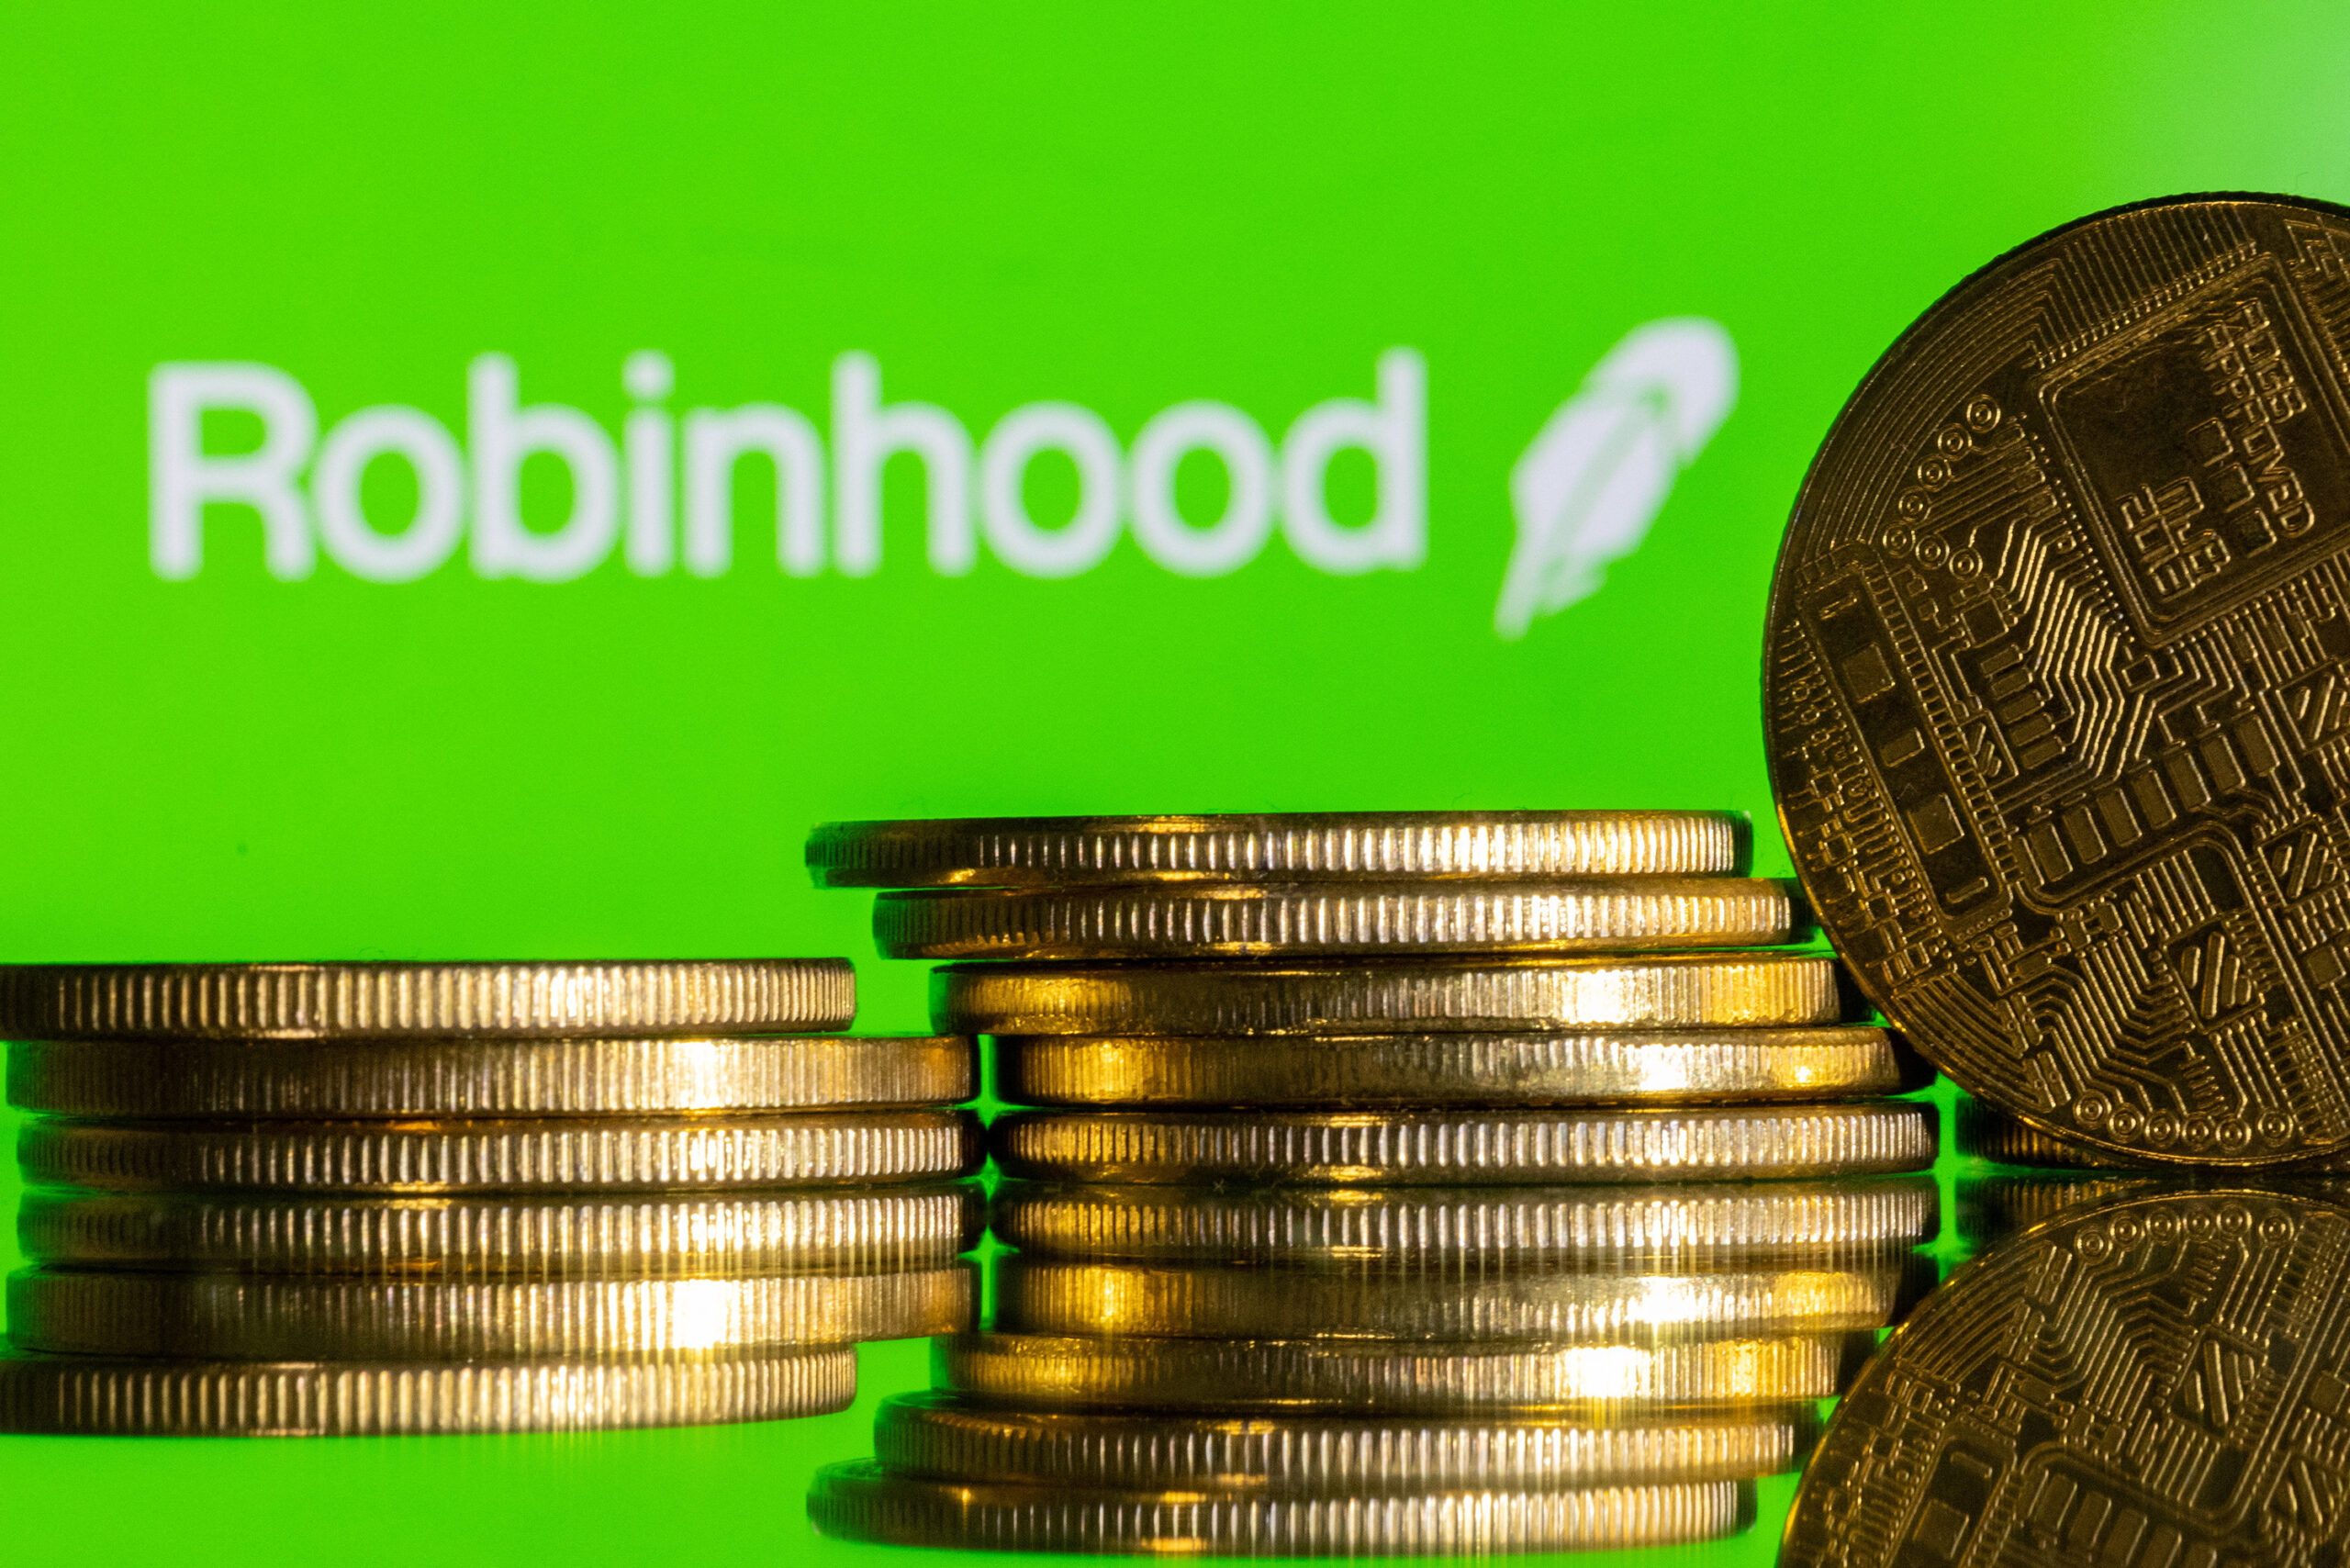 Robinhood Crypto gets enforcement action notice from US SEC